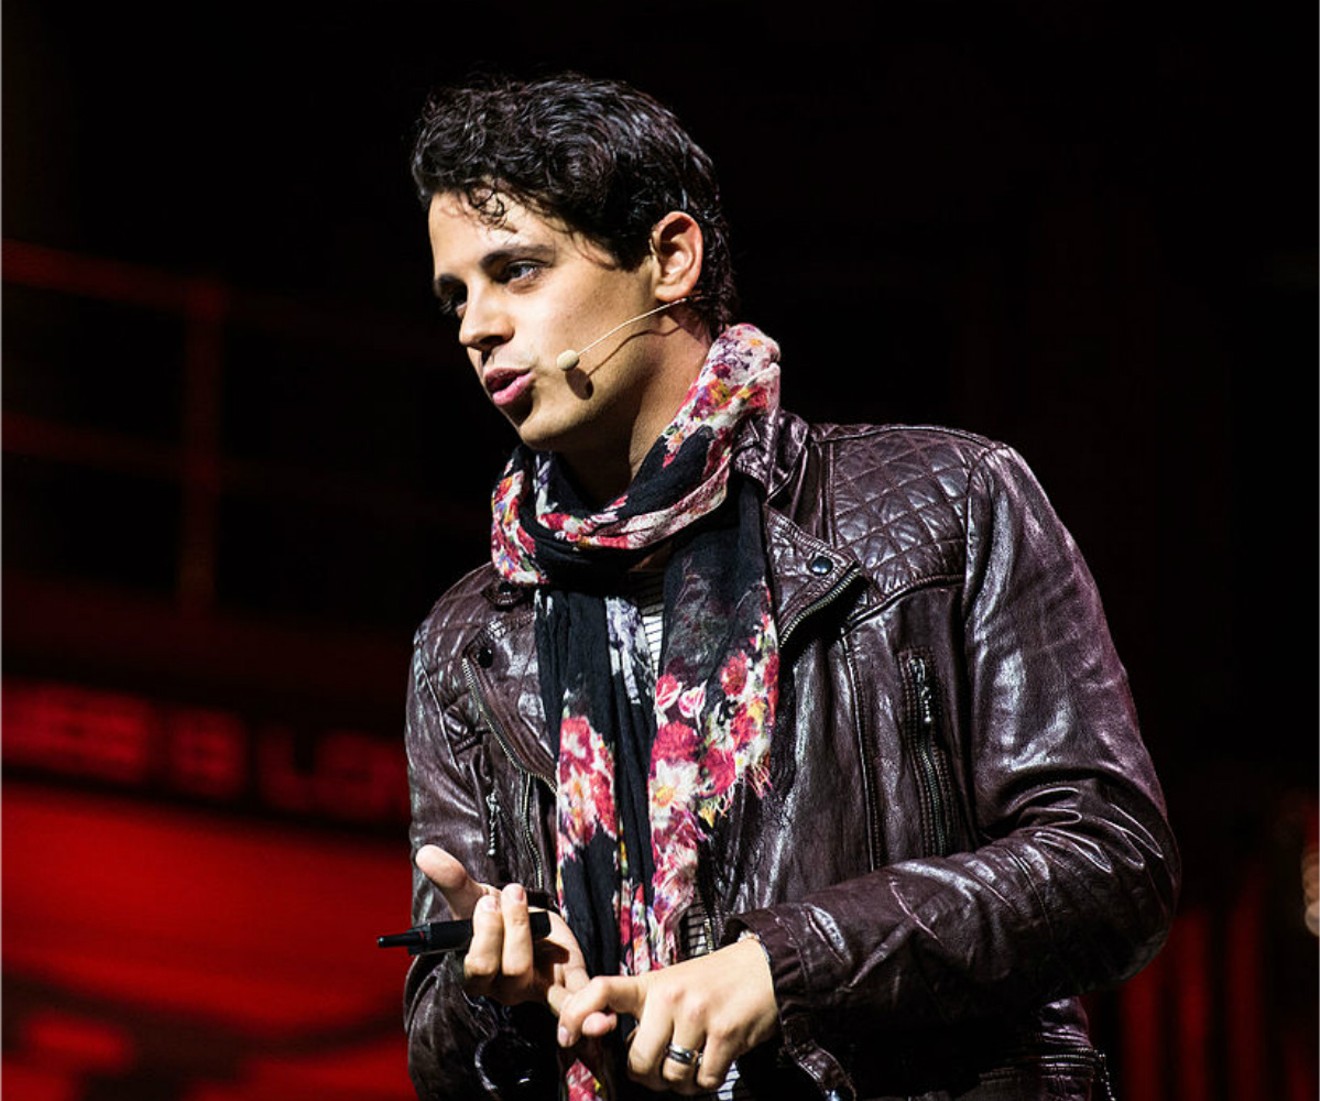 Milo agonistes? On the contrary, the left's mania for confirmation bias plays right into the hands of Yiannopoulos and his allies.